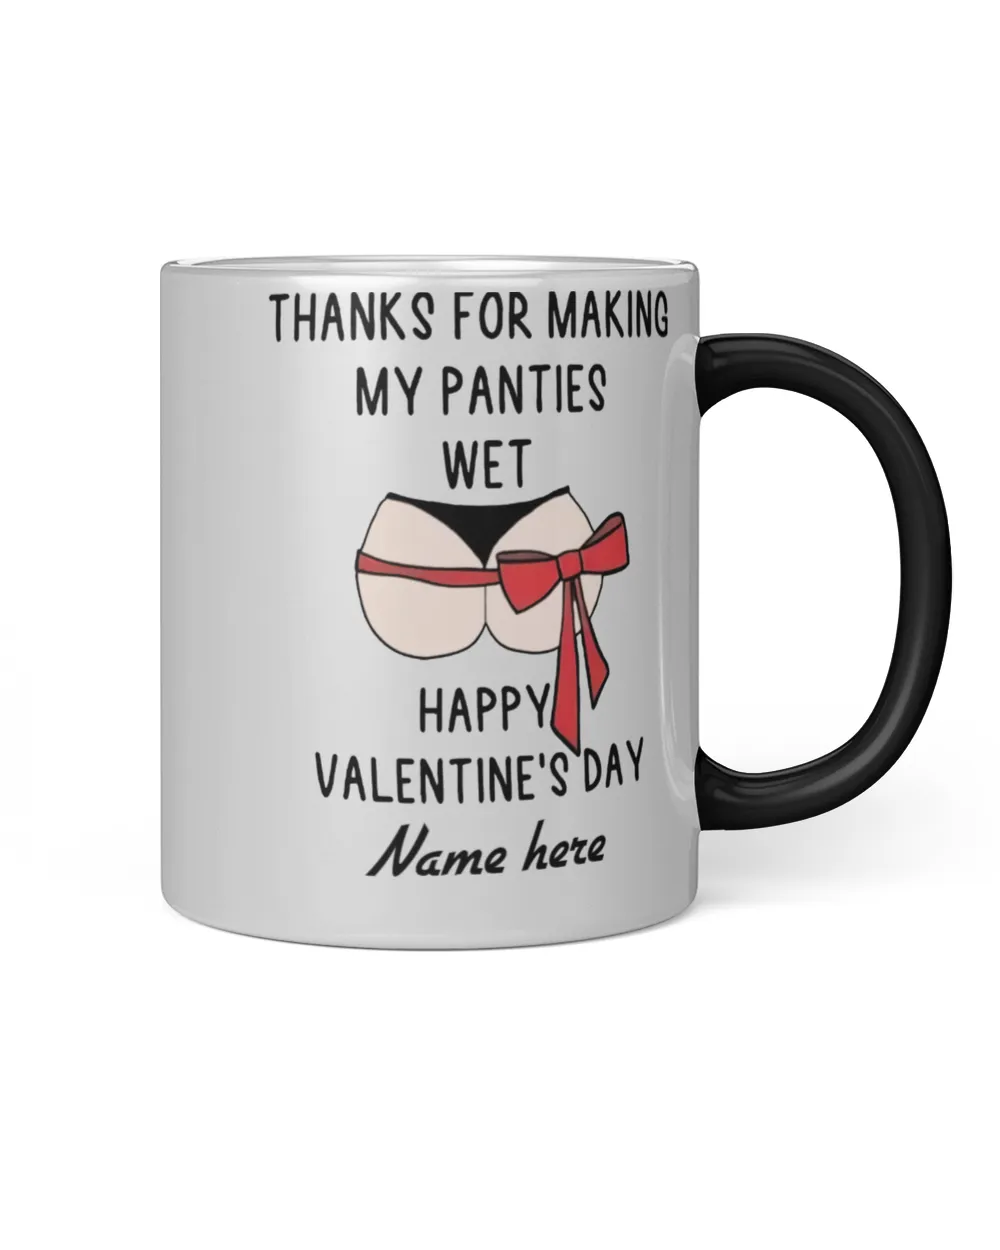 Thanks For Making My Panties Wet Personalized Mug Valentine Gift For Husband Boyfriend